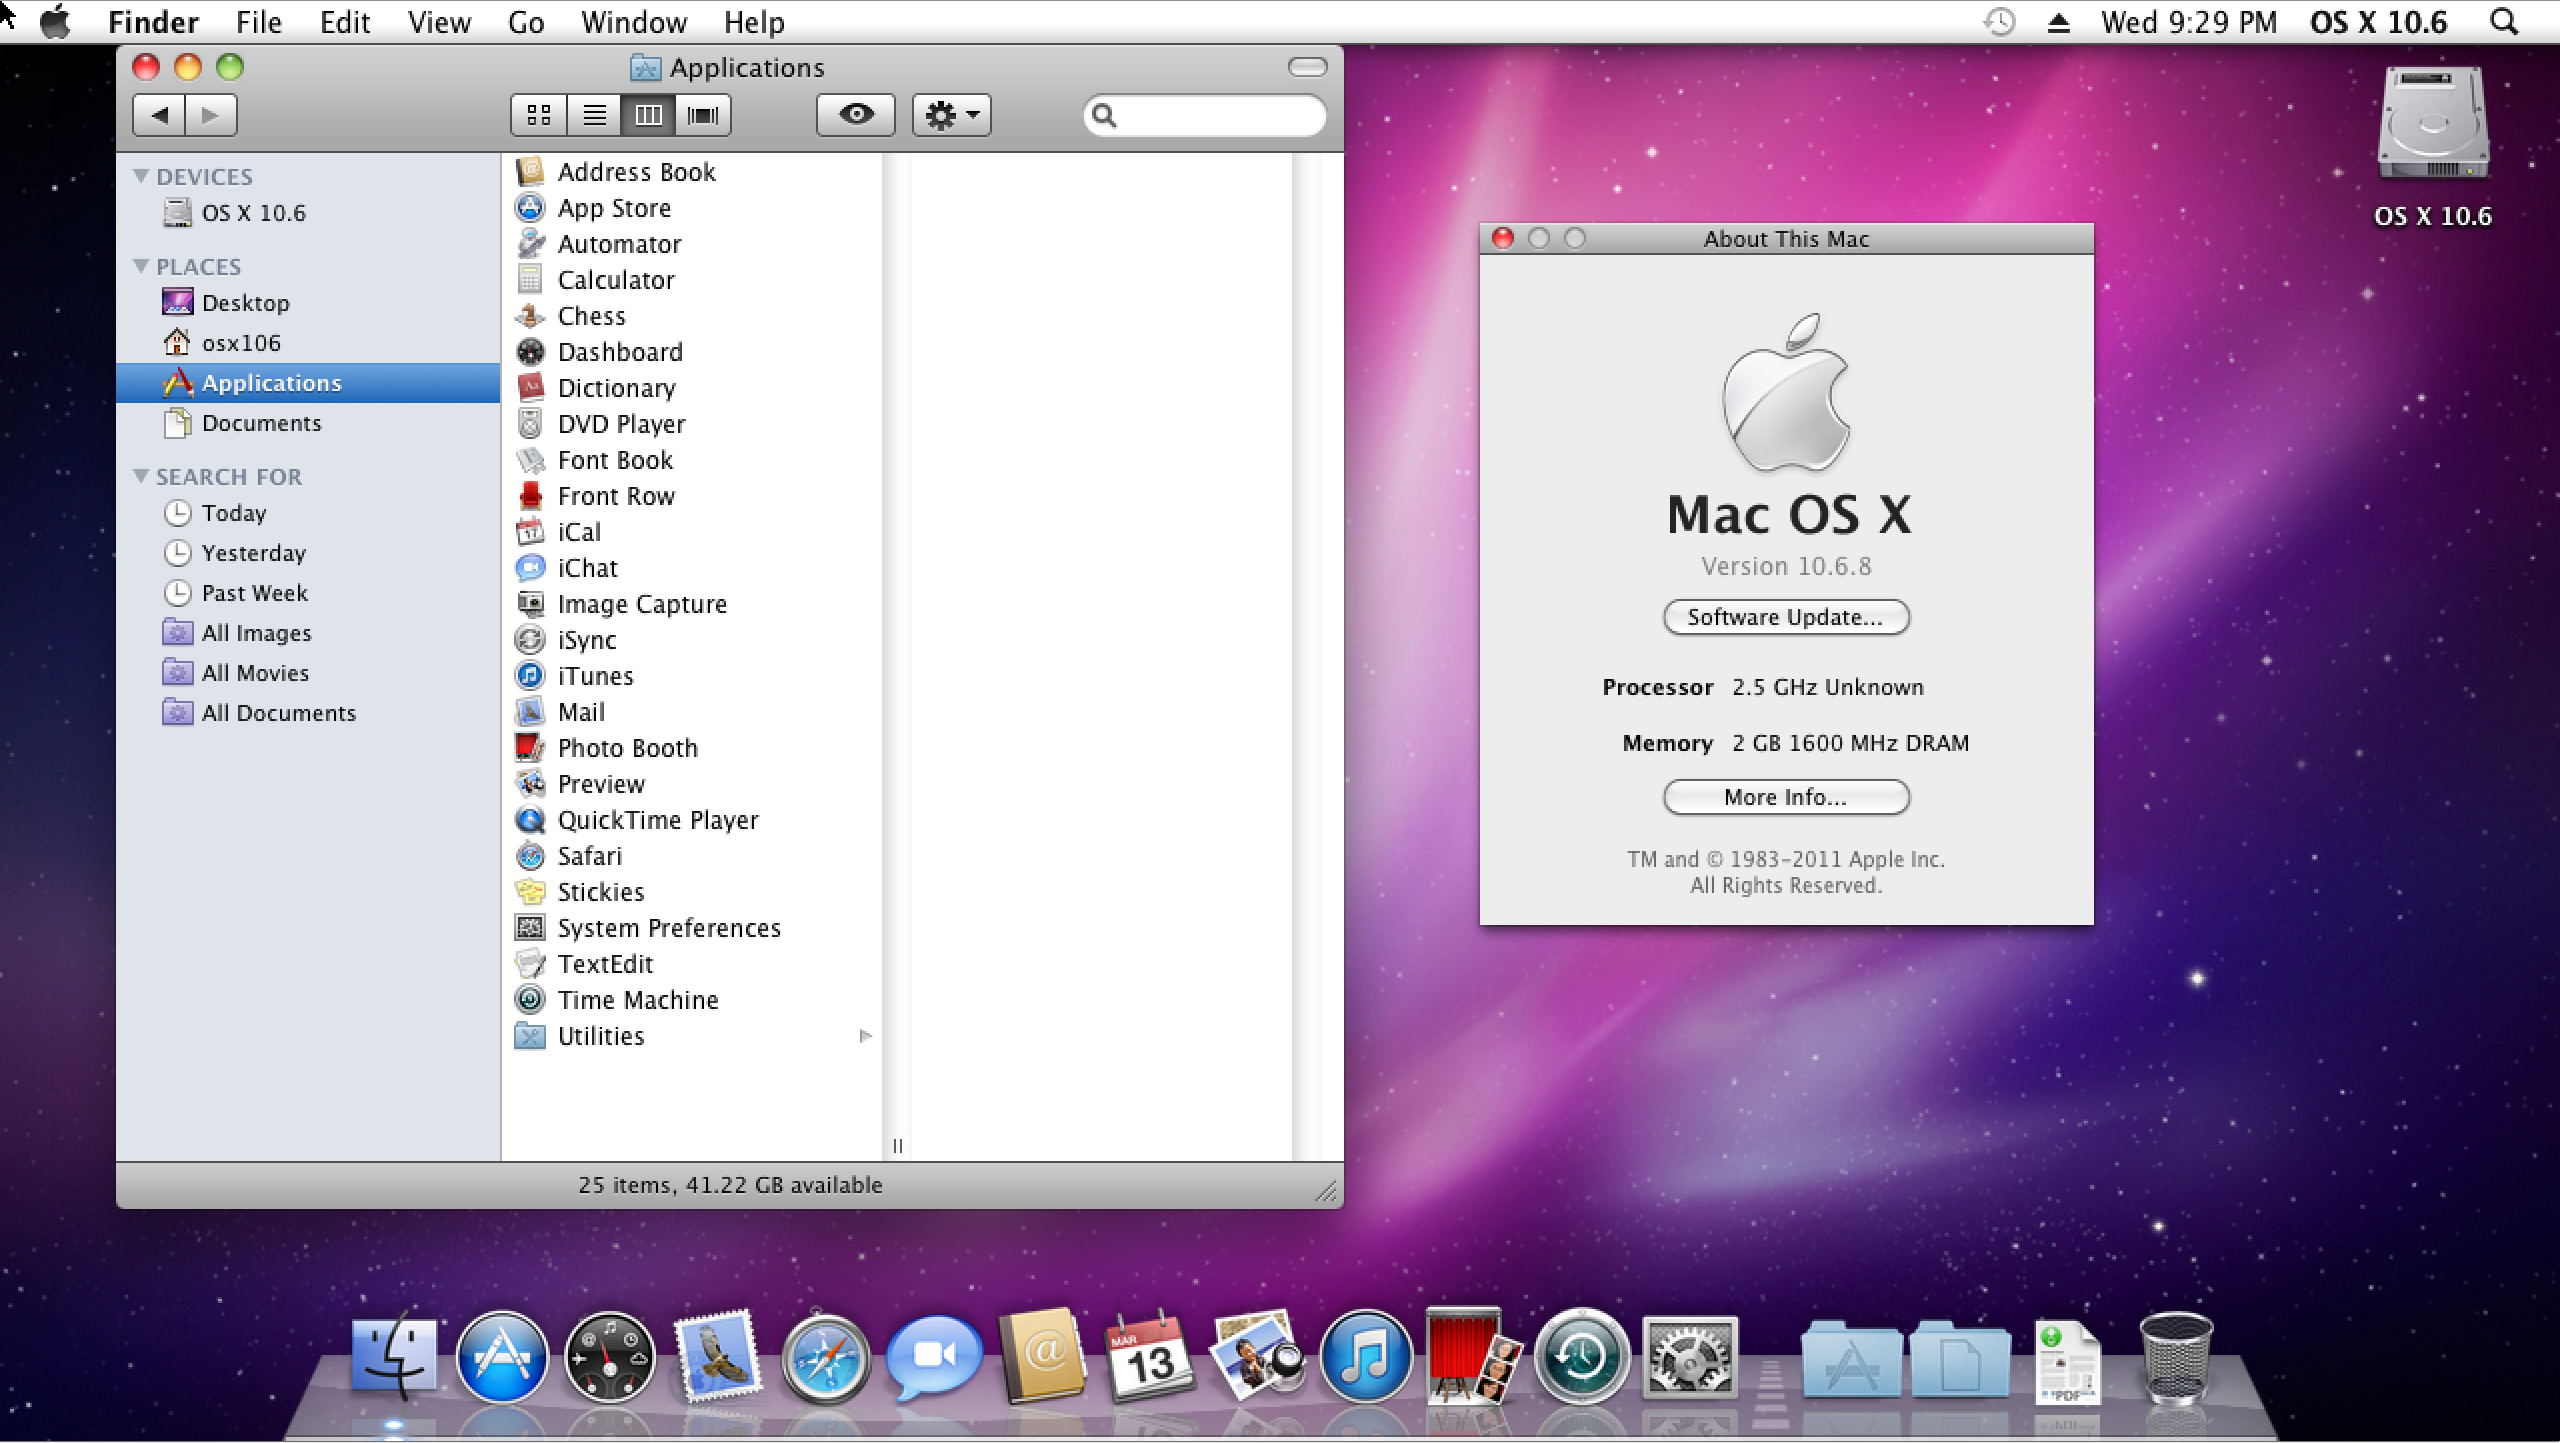 adobe download for mac os x 10.6.8